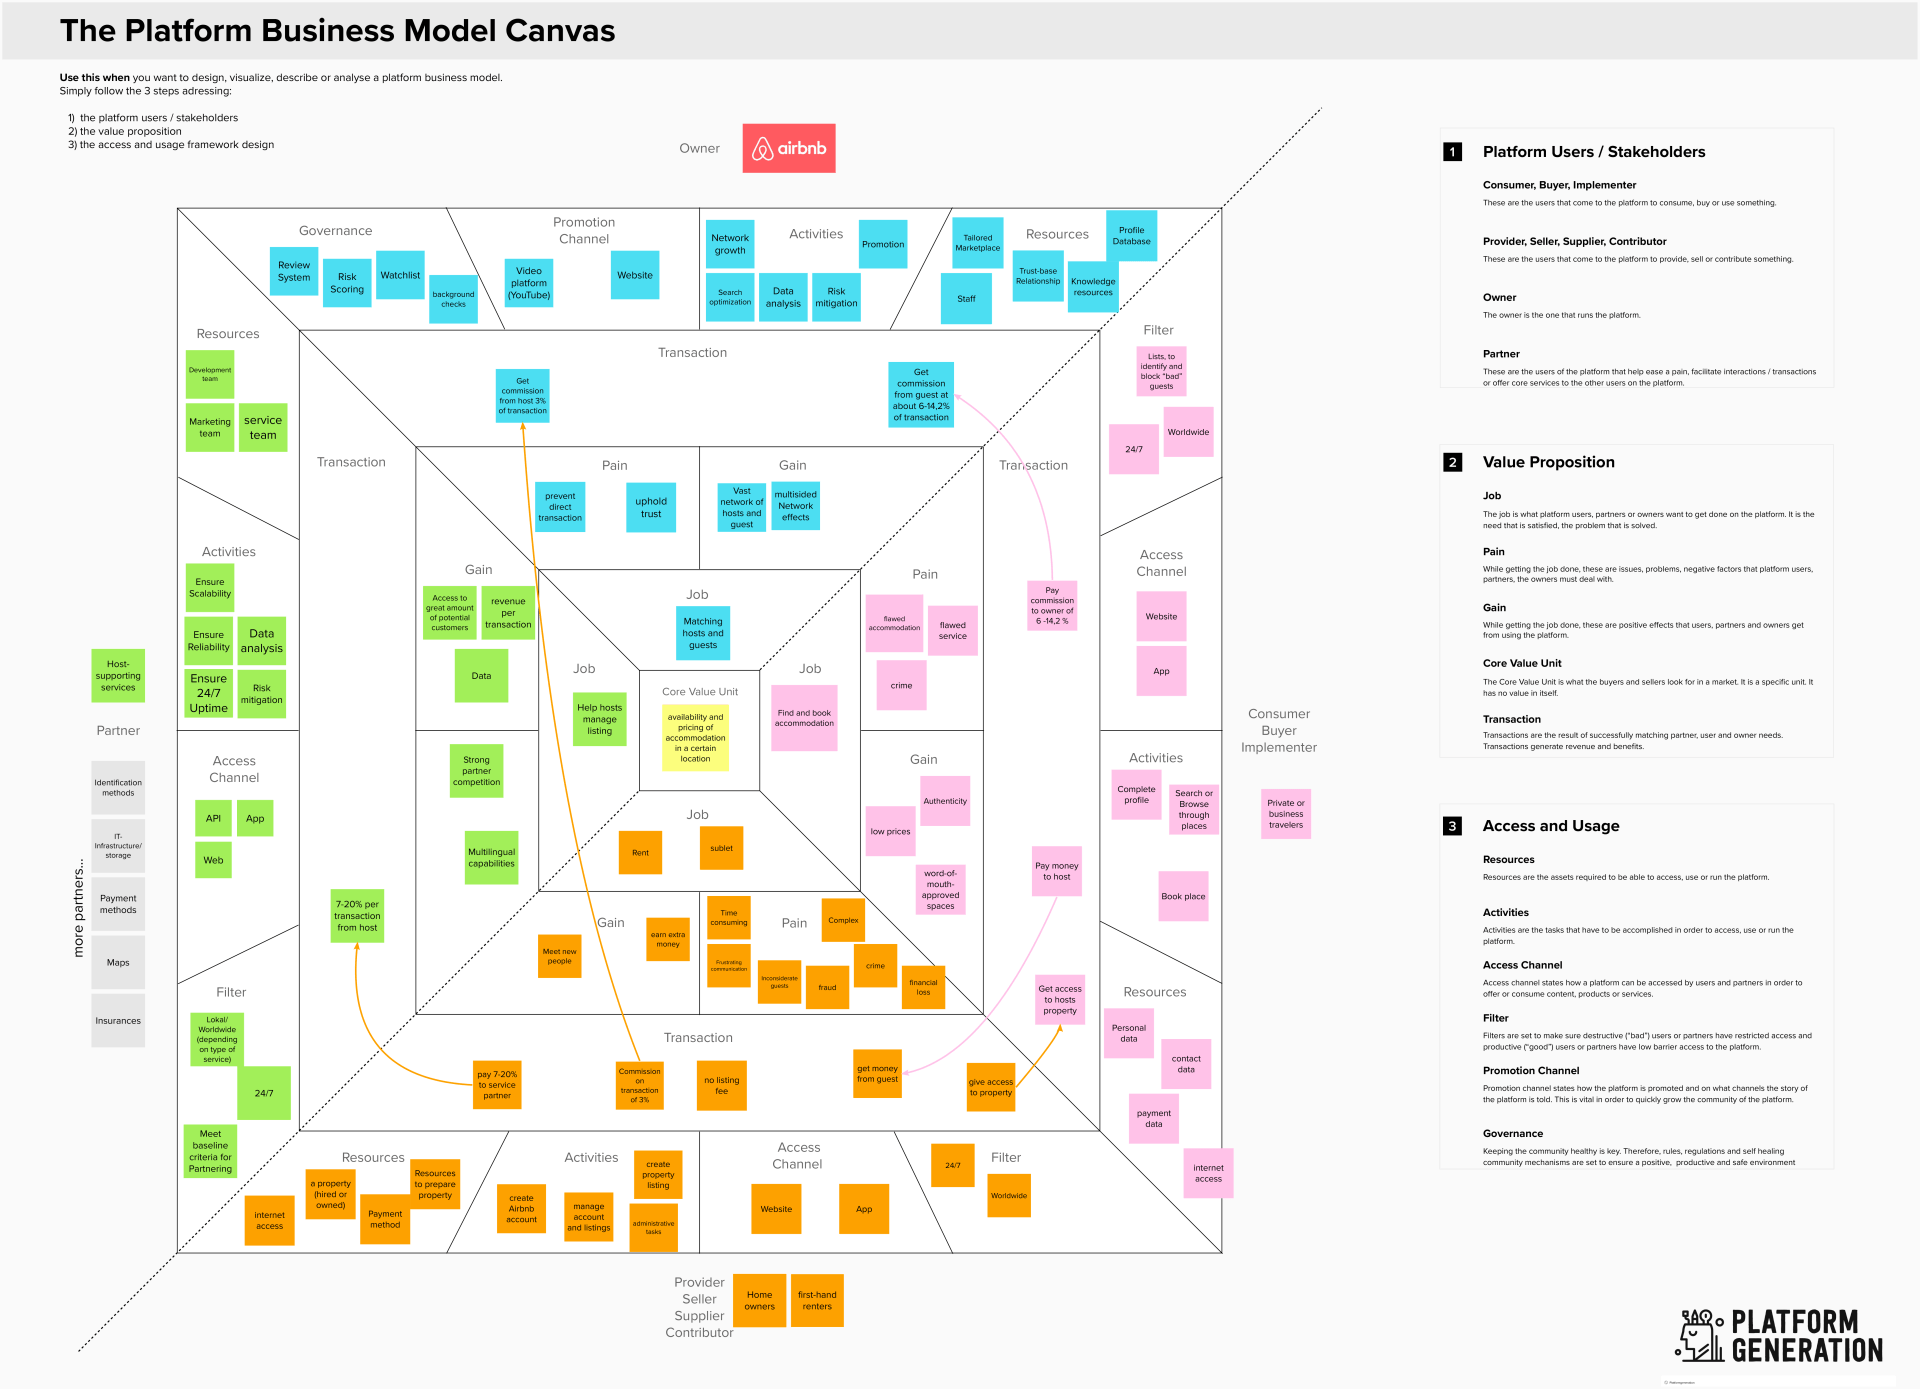 the platform business model canvas of AirBnB